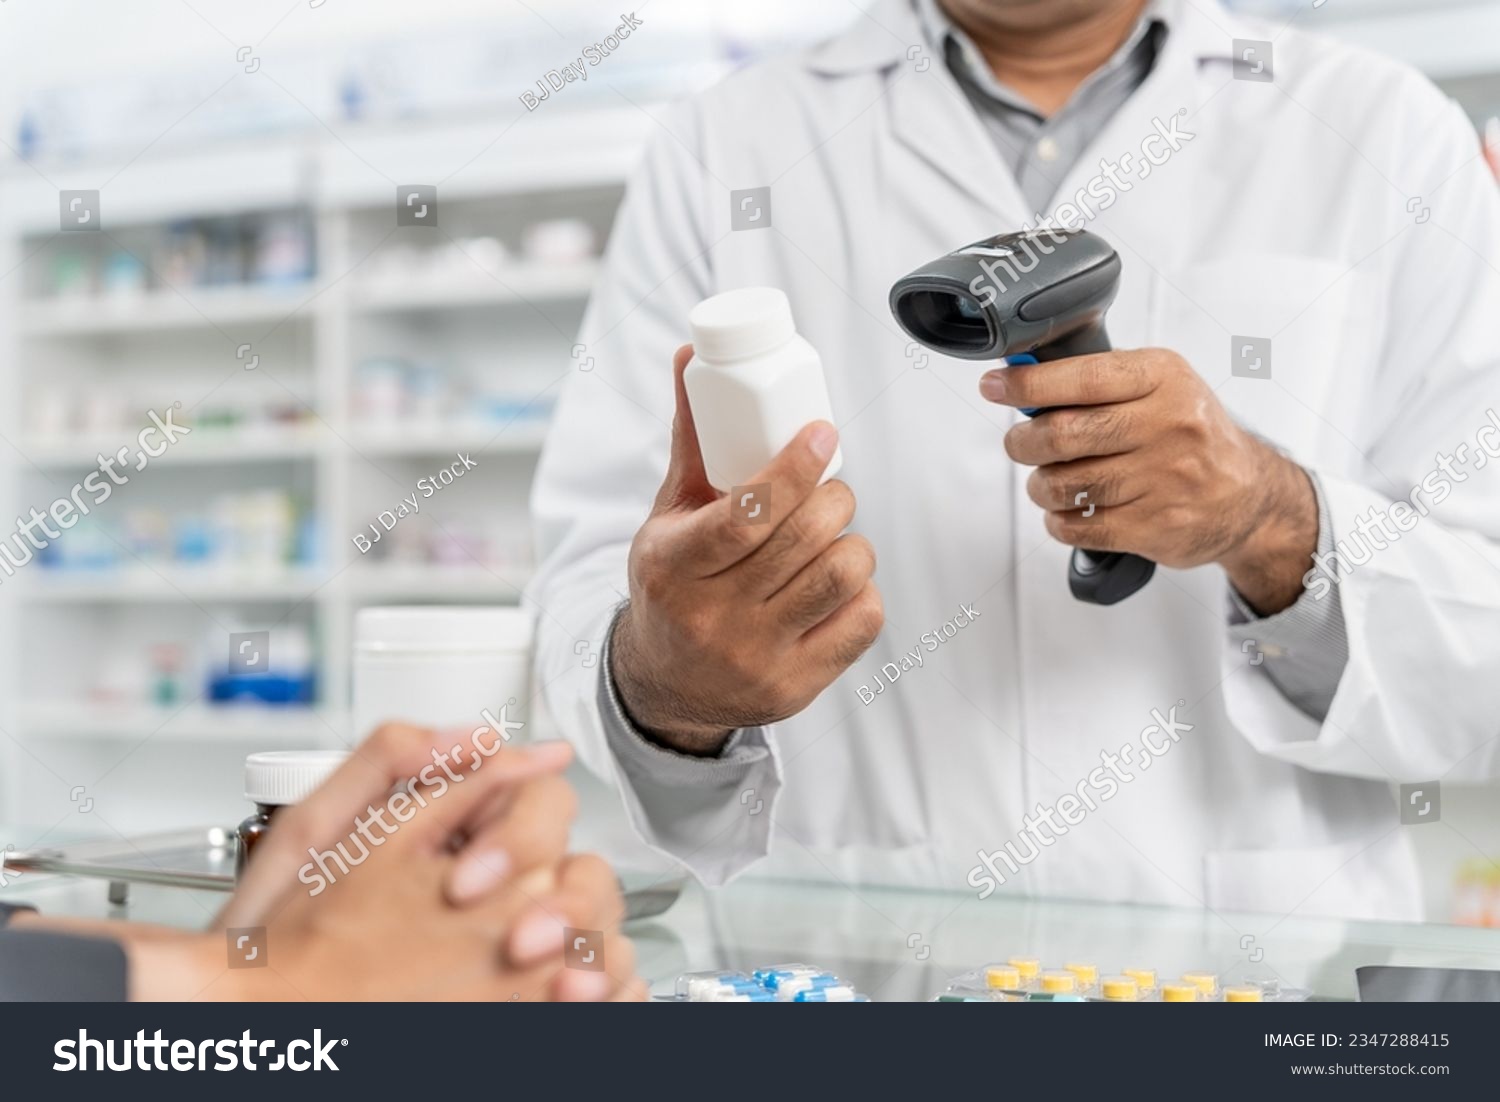 Close up hands of male pharmacist using barcode scanner for selling medicine to patient customer in the pharmacy drugstore, hand over capsule pills of medicine from hand to another hand charge. #2347288415